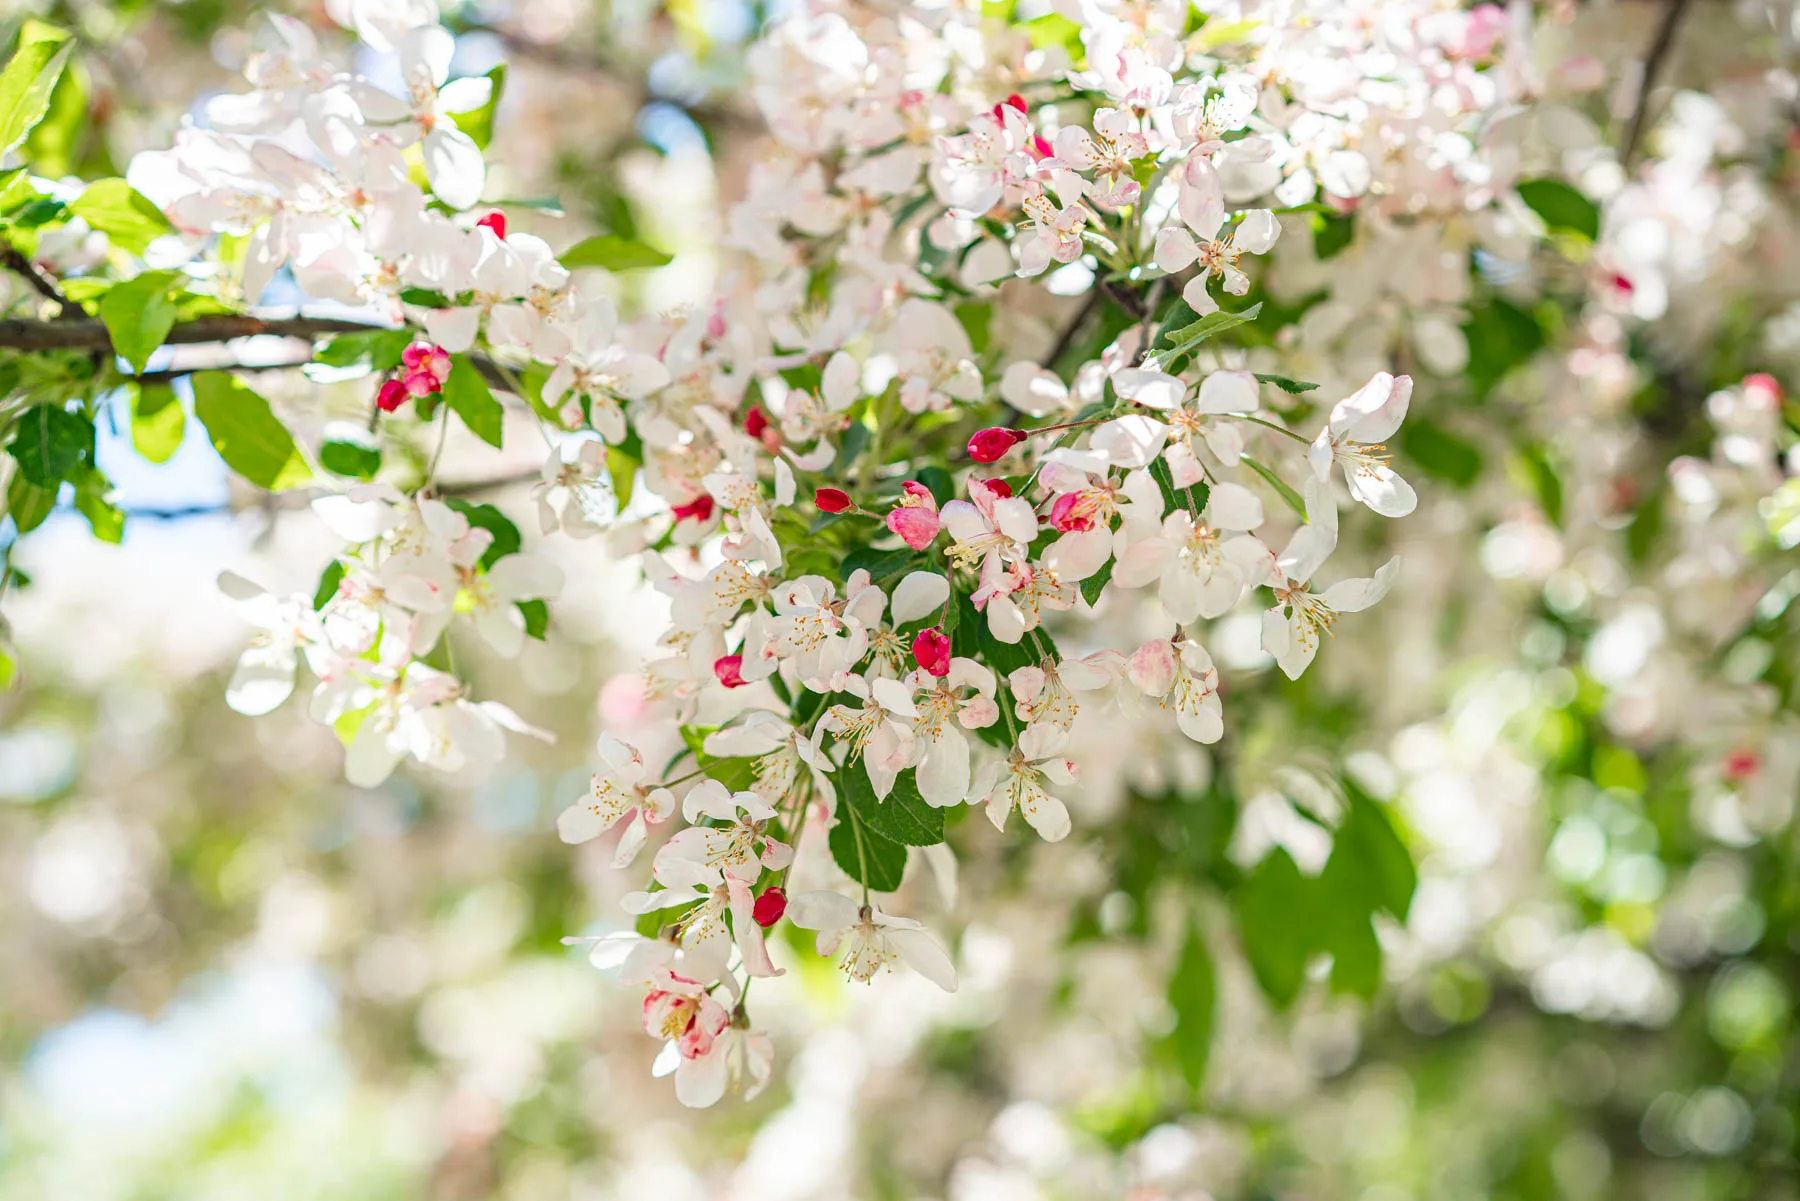 Types of cherry trees in NYC
crabapple tree blossoms